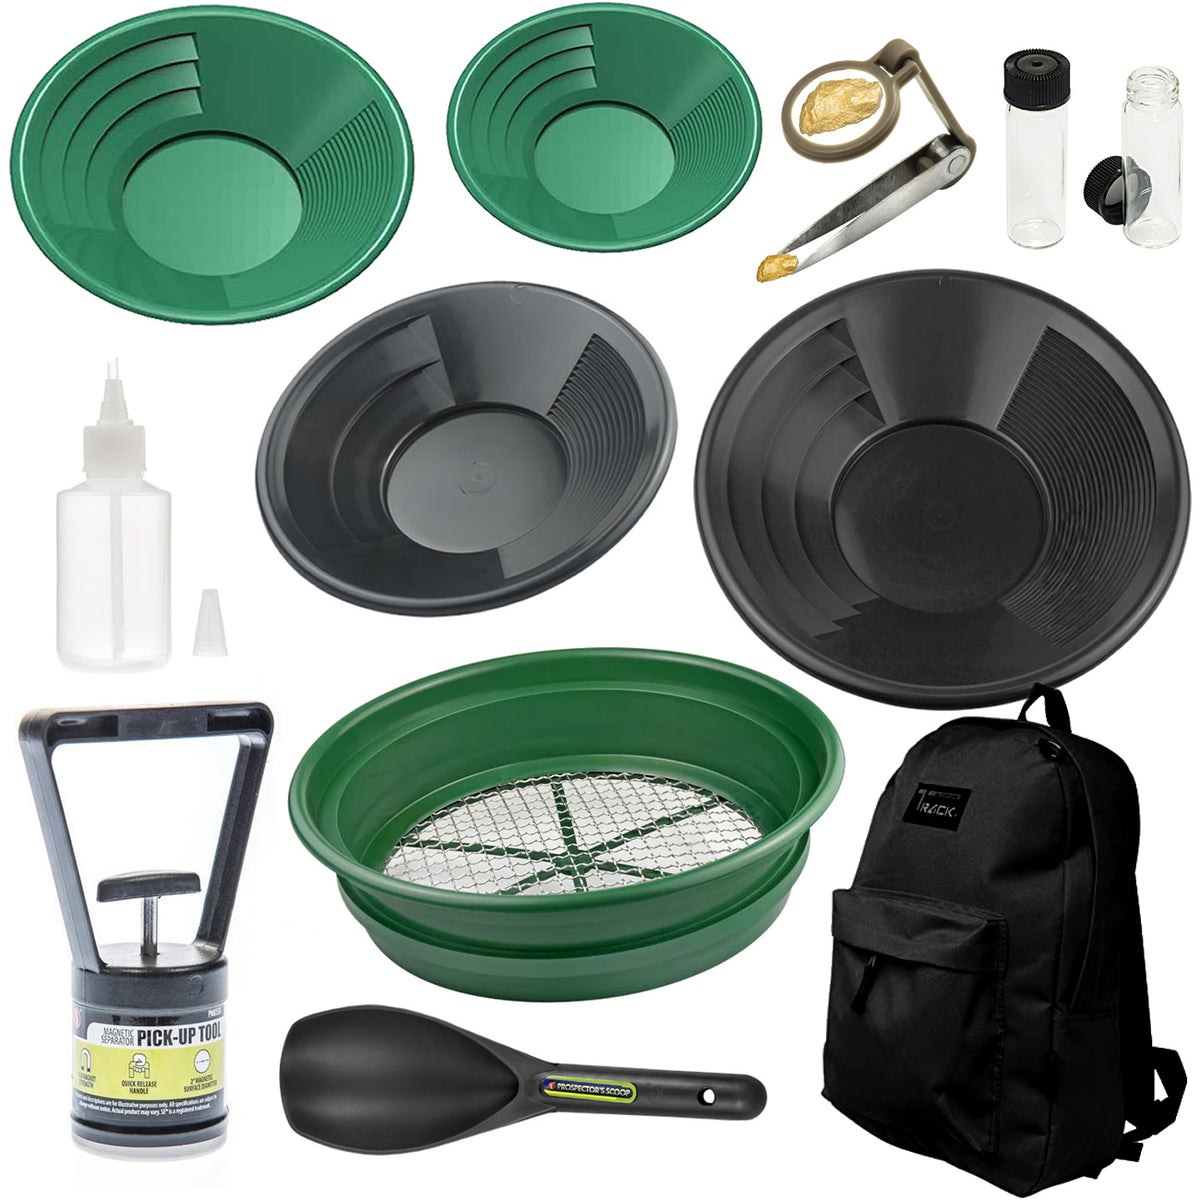  Sluice Monkey 12 Green & Black Gold Pan Panning Kit with  Sniffer & Vial : Patio, Lawn & Garden